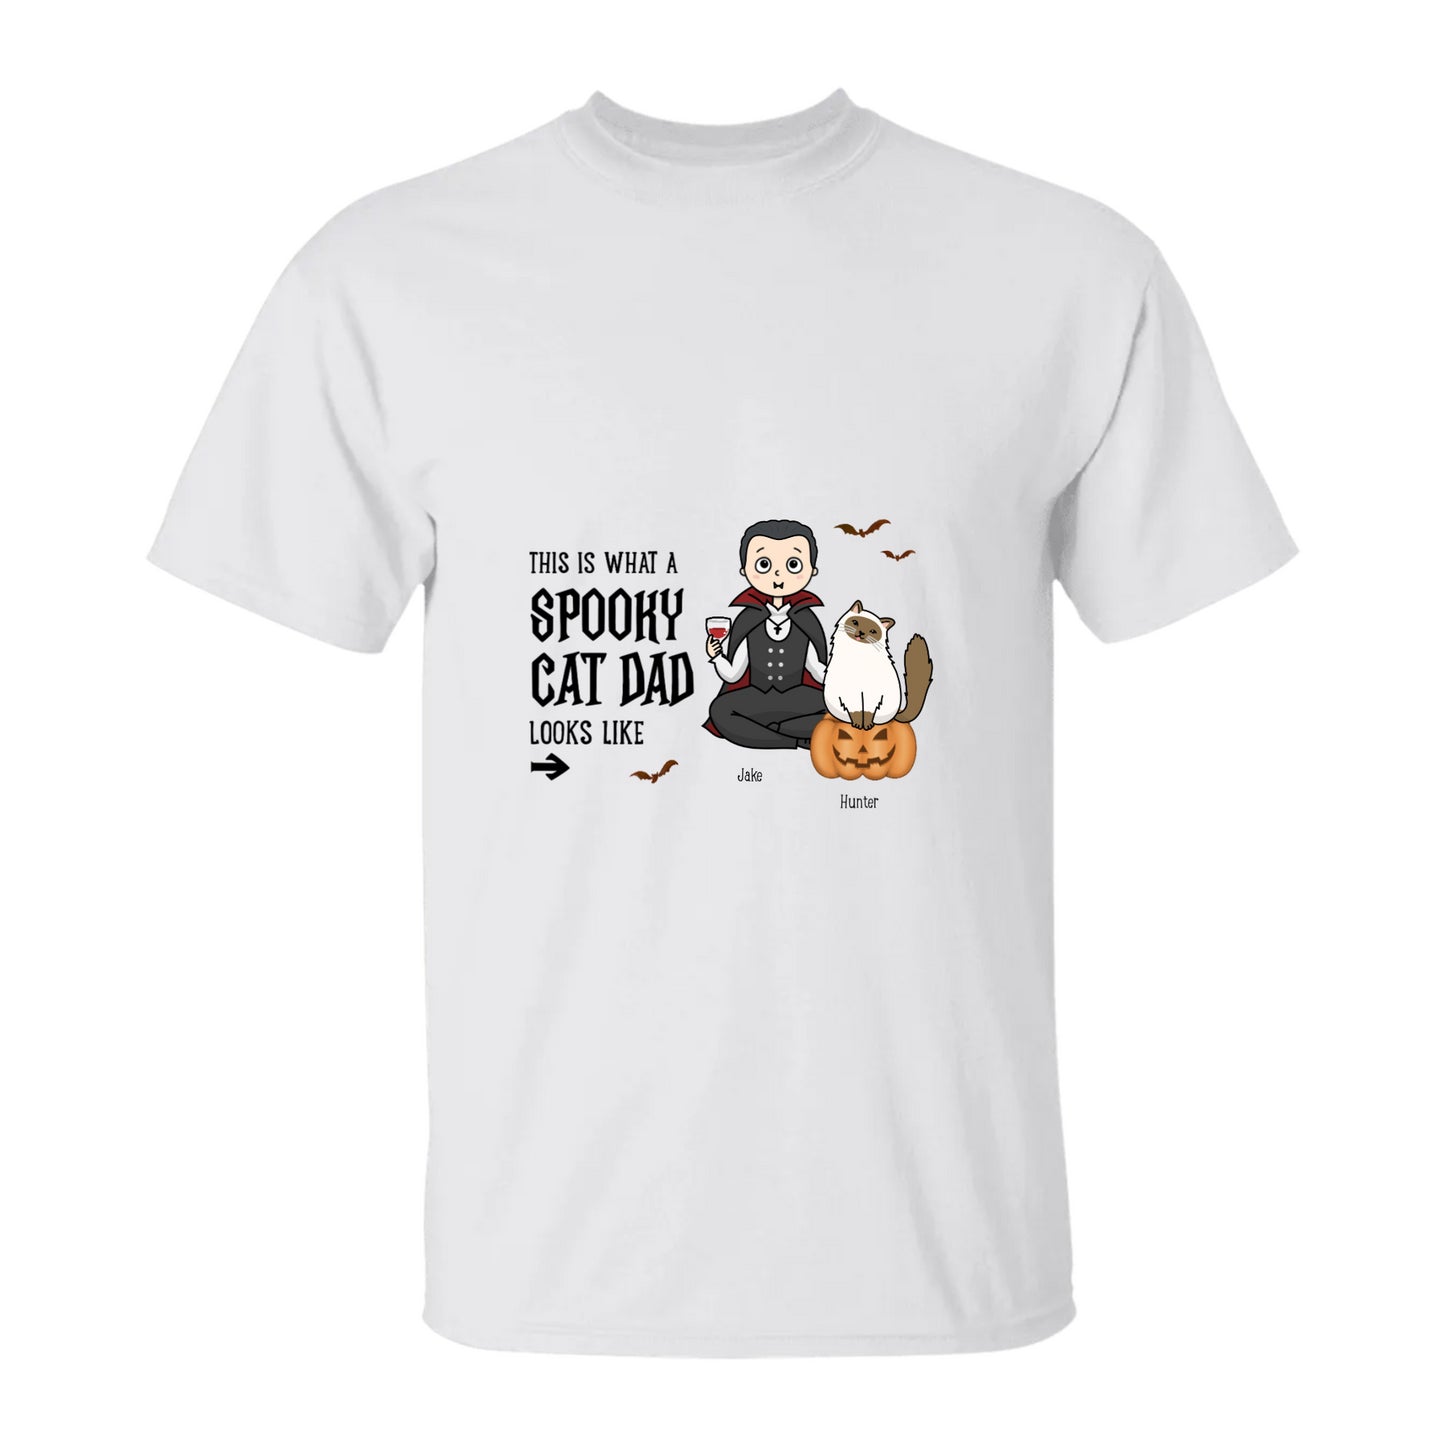 This is What A Spooky Cat Dad Looks Like T-Shirt